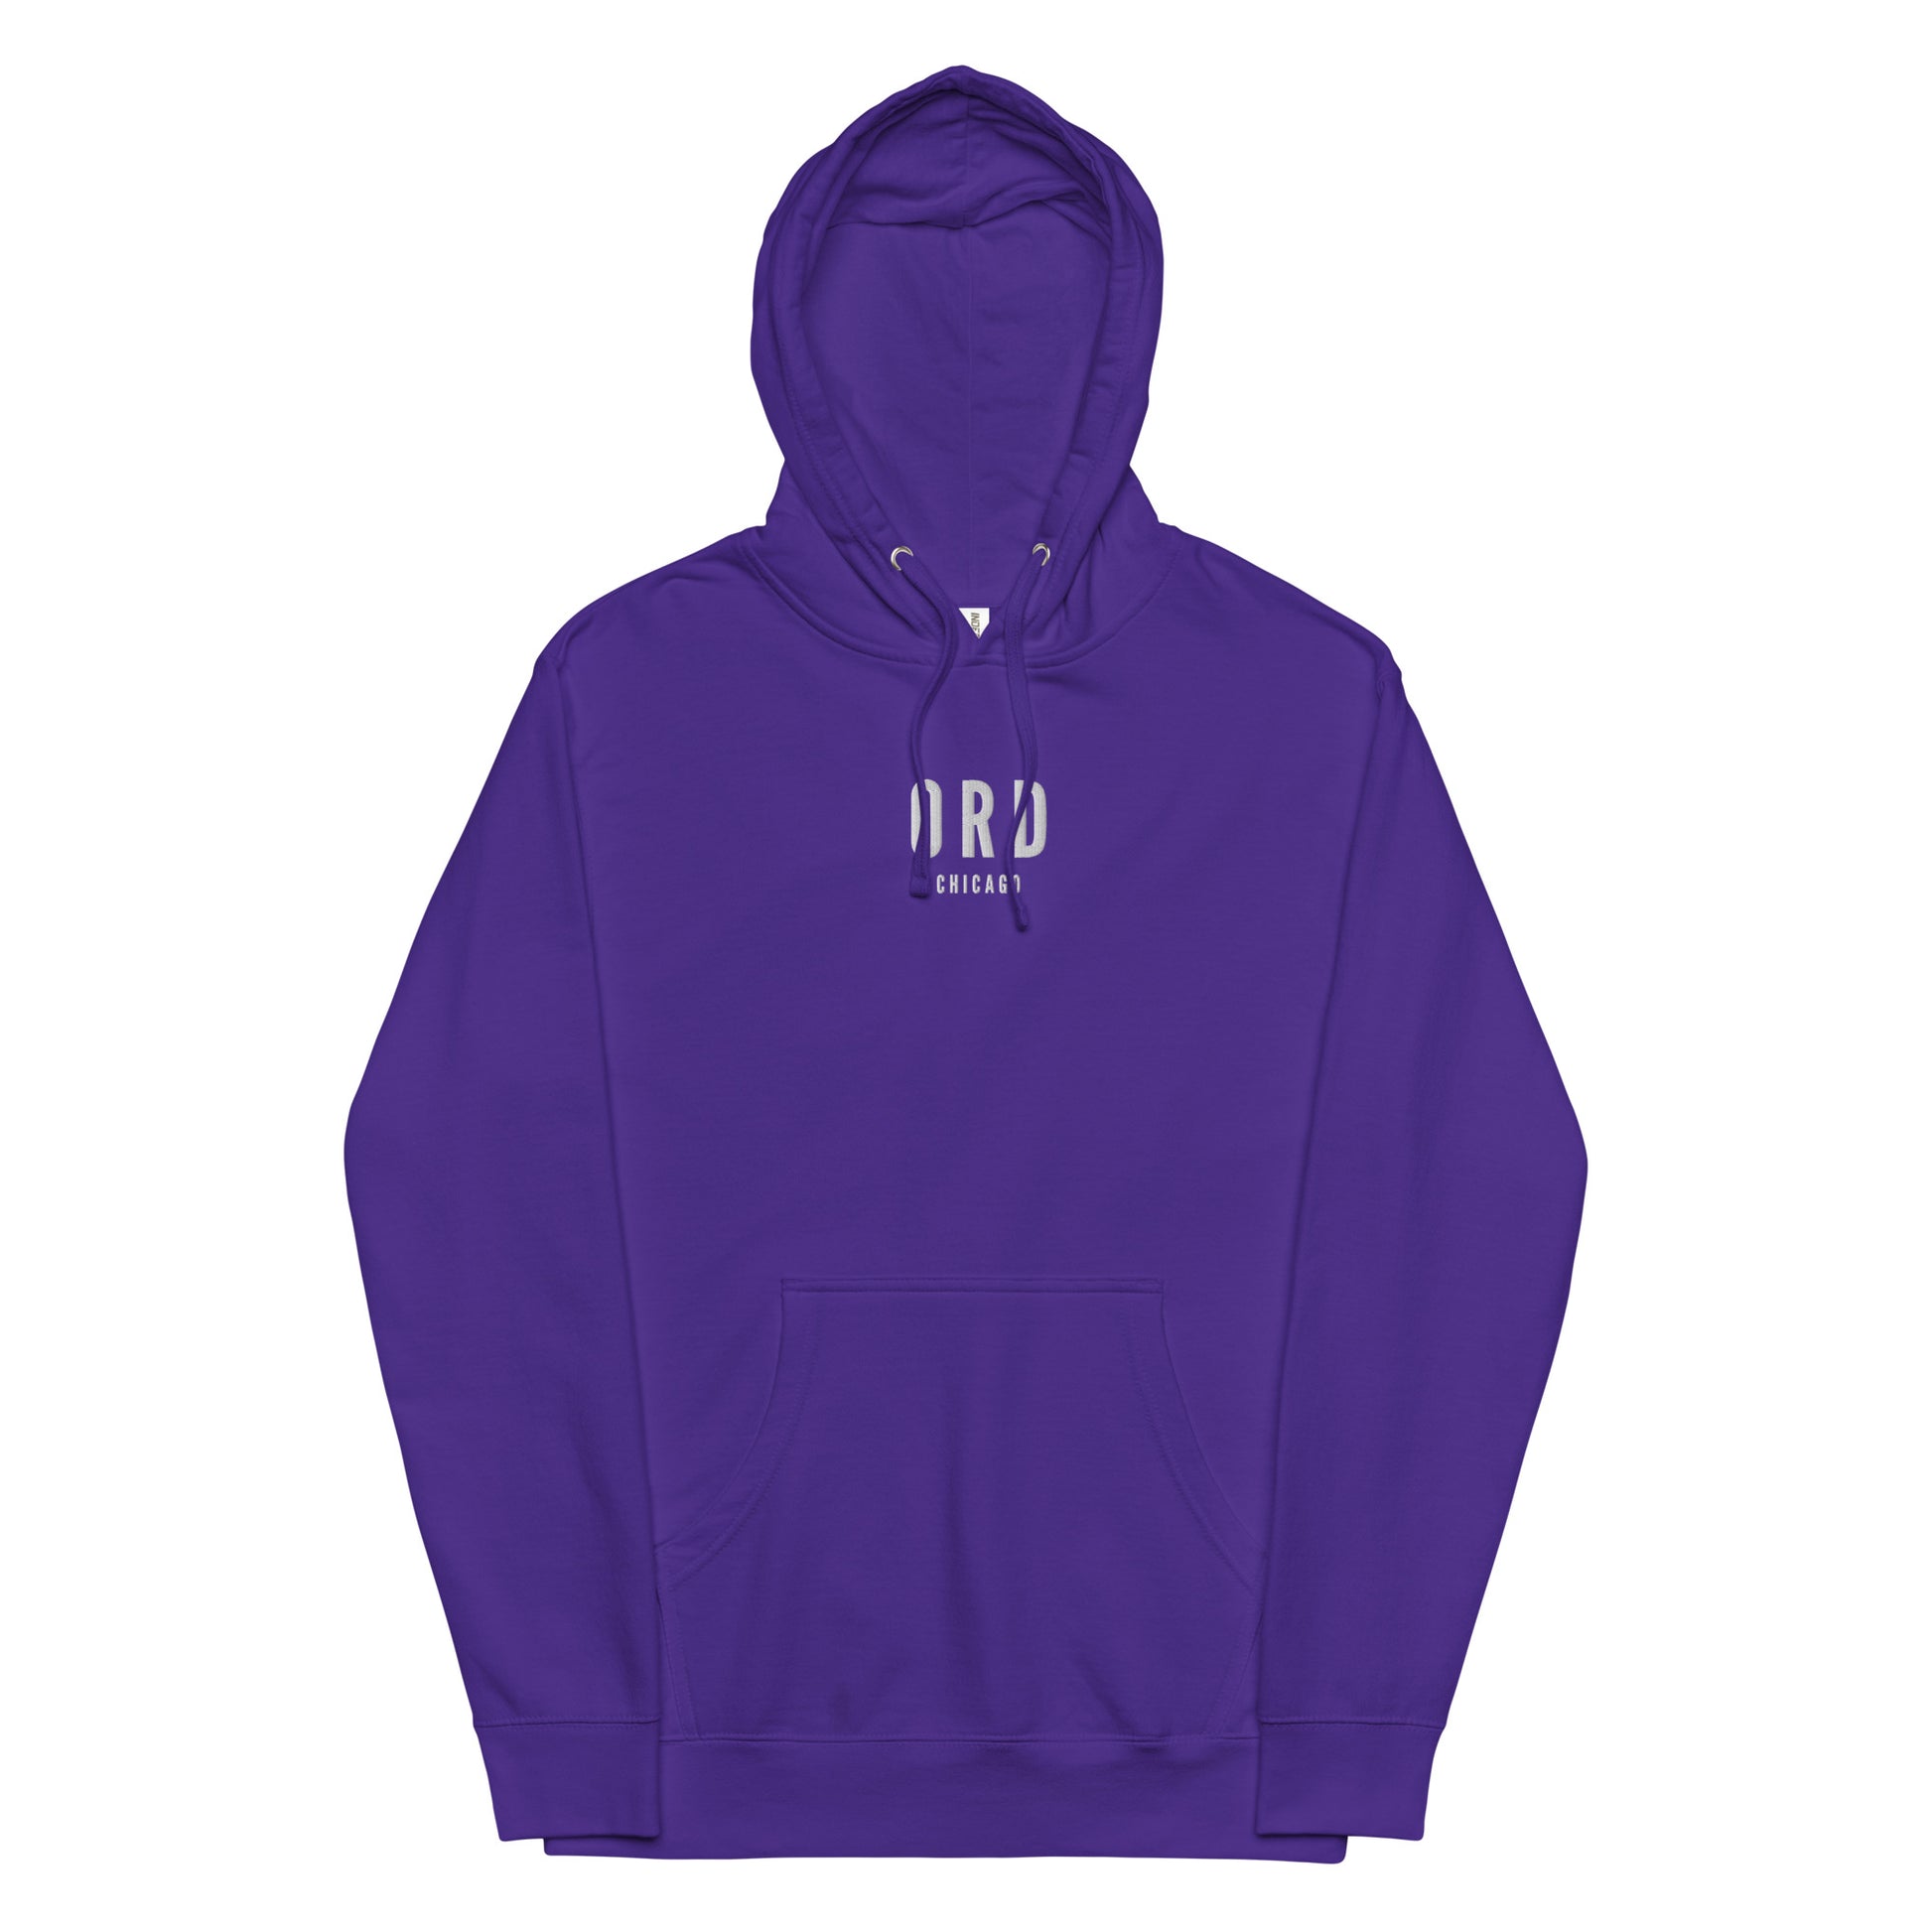 City Midweight Hoodie - White • ORD Chicago • YHM Designs - Image 12